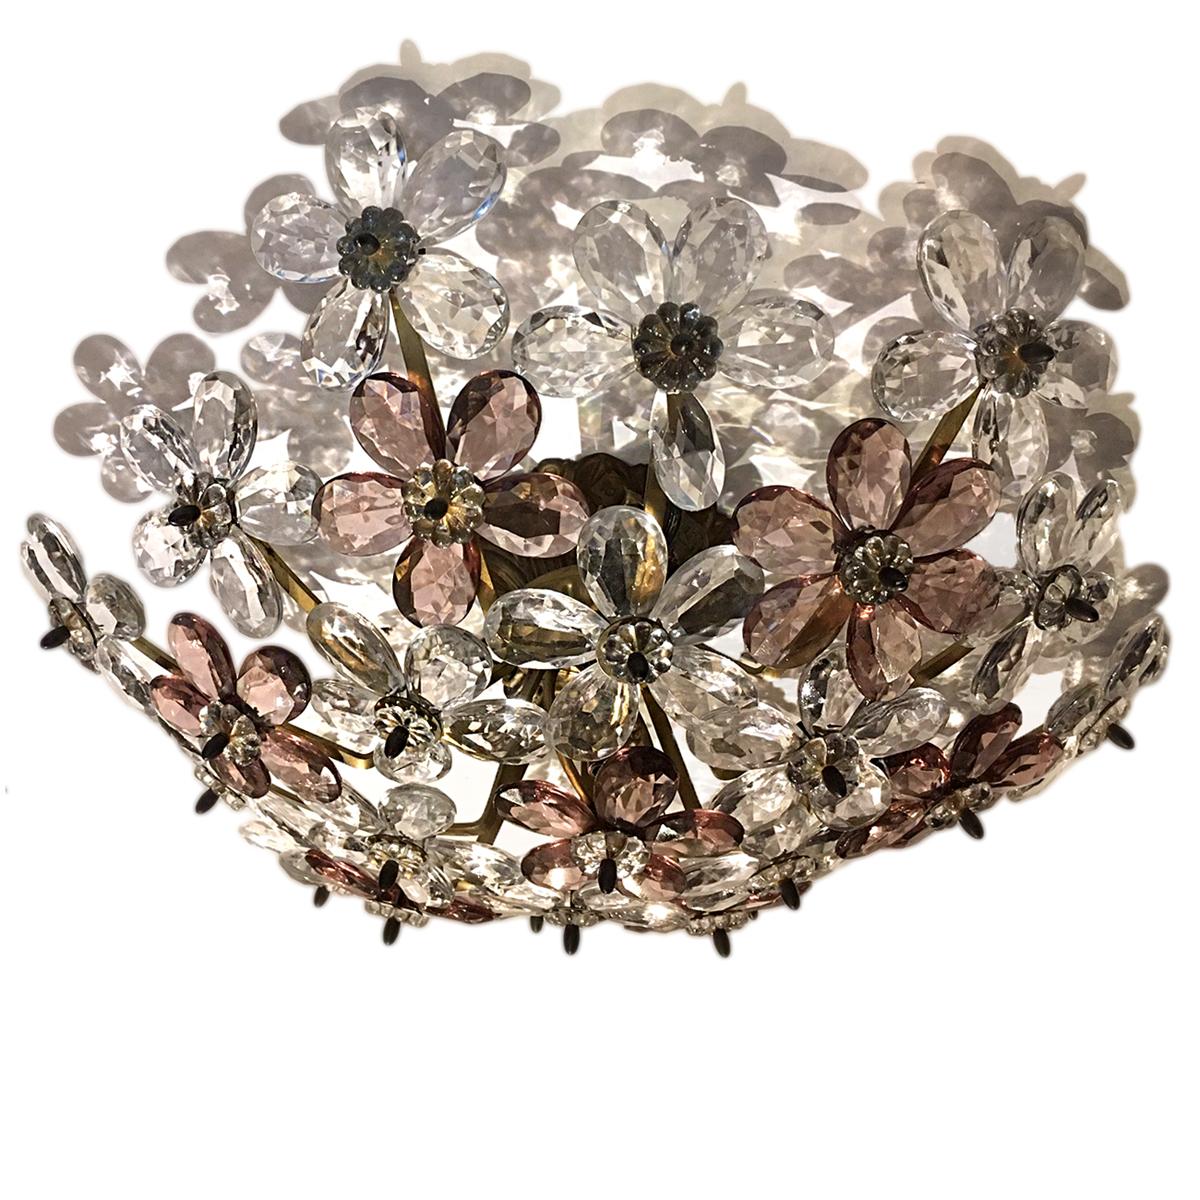 A circa 1940s French crystal flush mounted light fixture with clear and amethyst flowers and interior lights.

Measurements:
Diameter 16